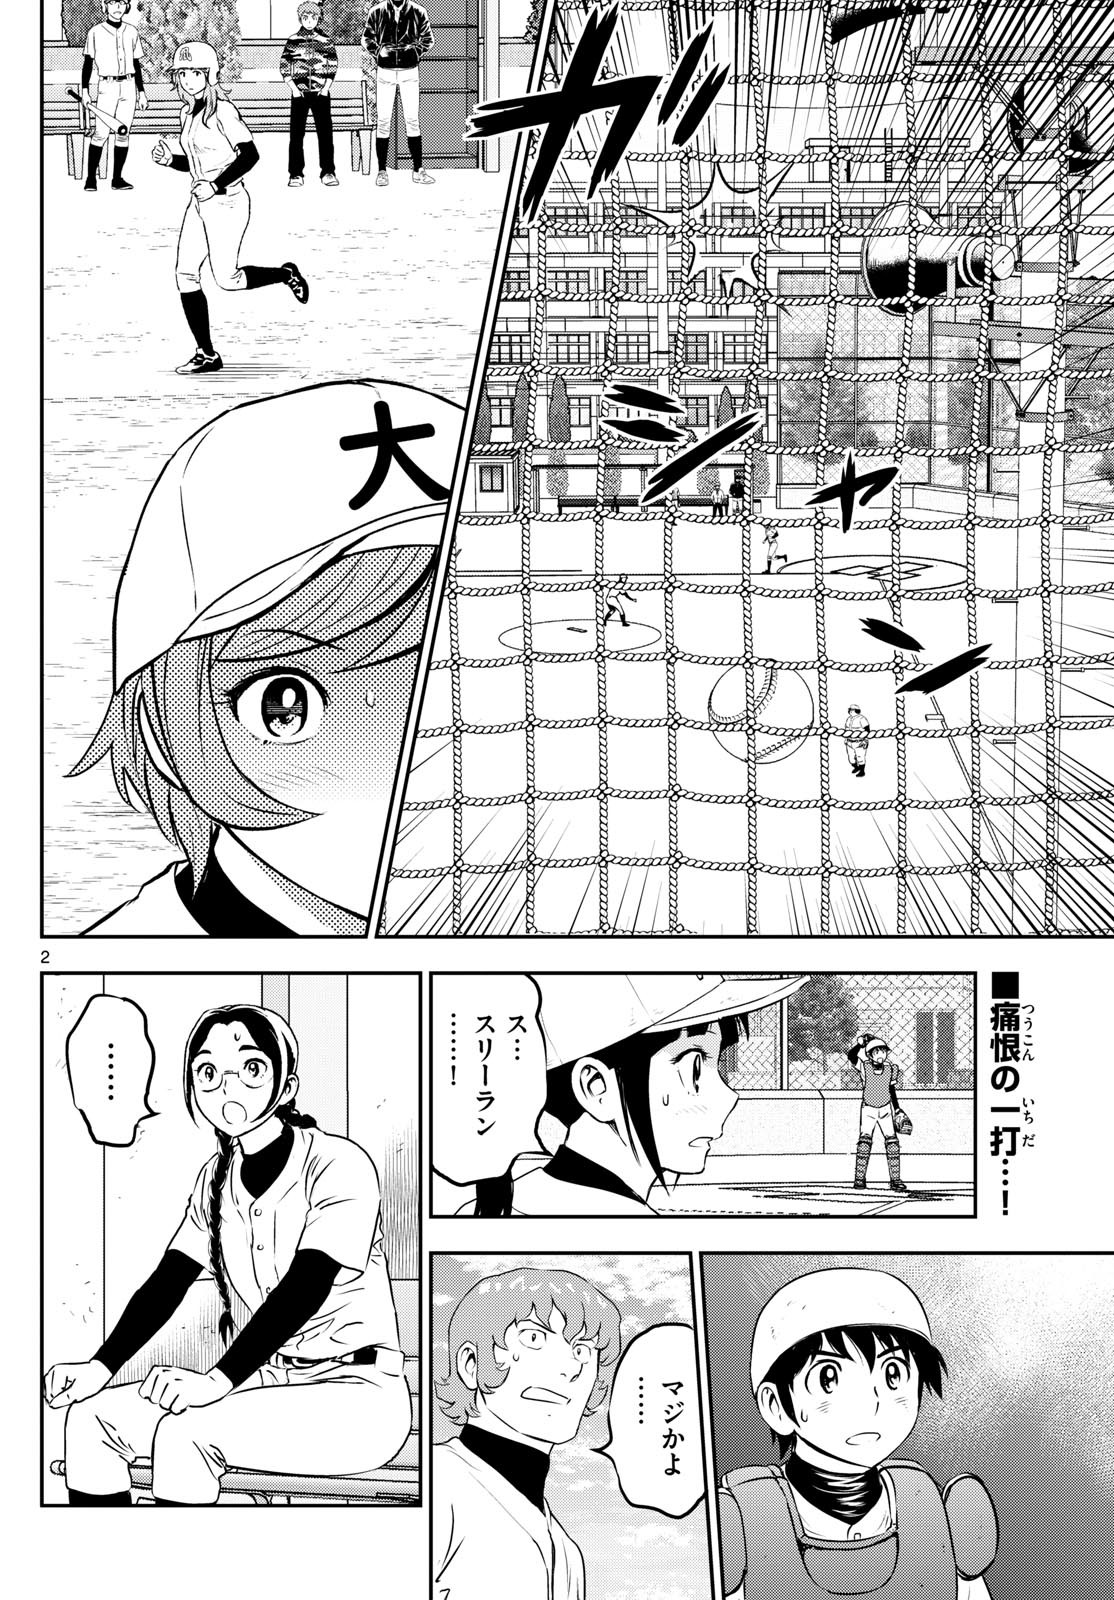 Major 2nd - メジャーセカンド - Chapter 281 - Page 2